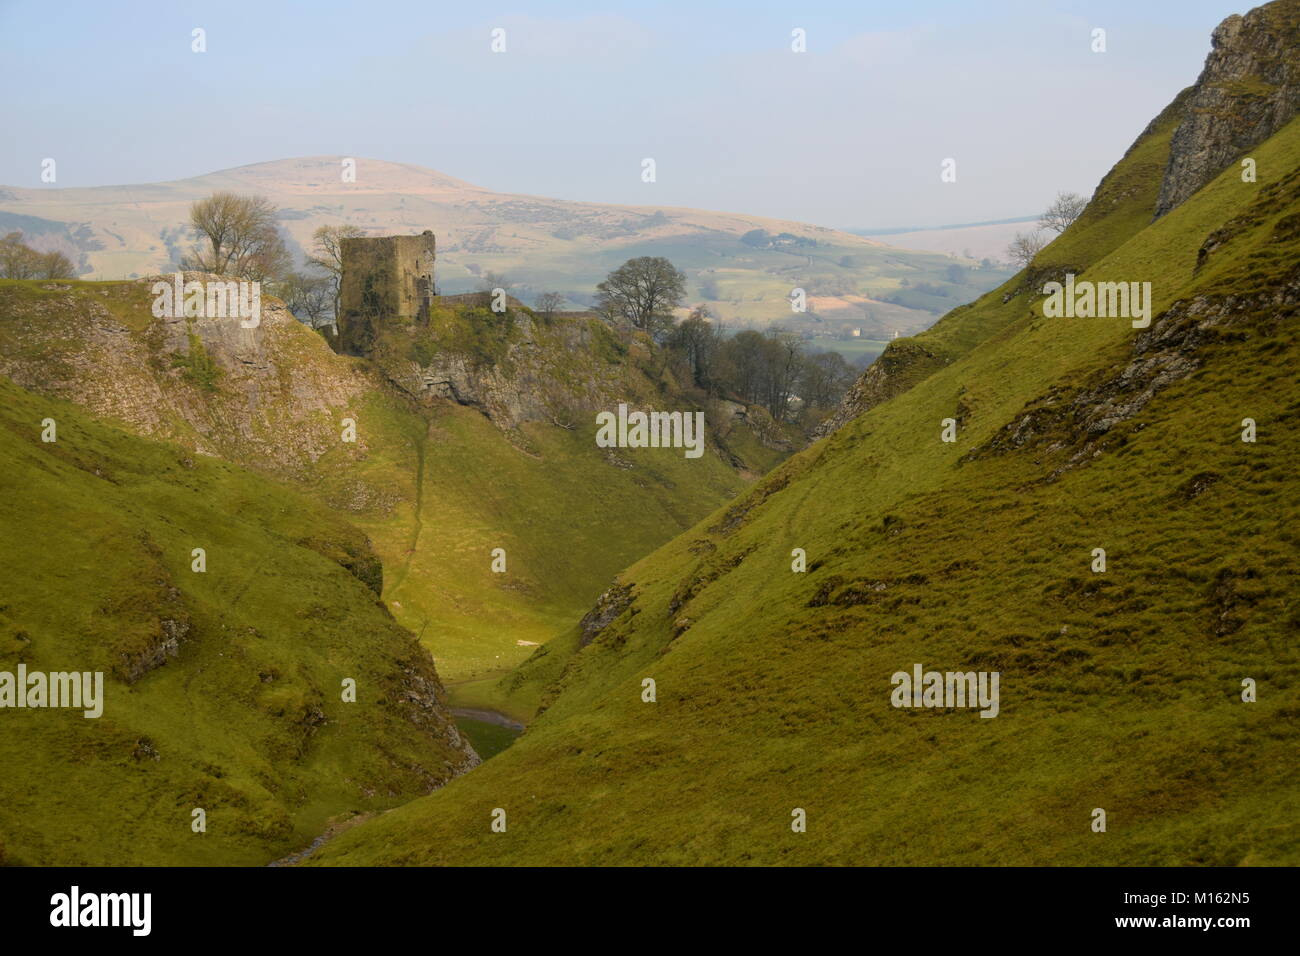 Peveril Castle, a ruined 11th-century castle overlooking the village of Castleton in the English county of Derbyshire Stock Photo